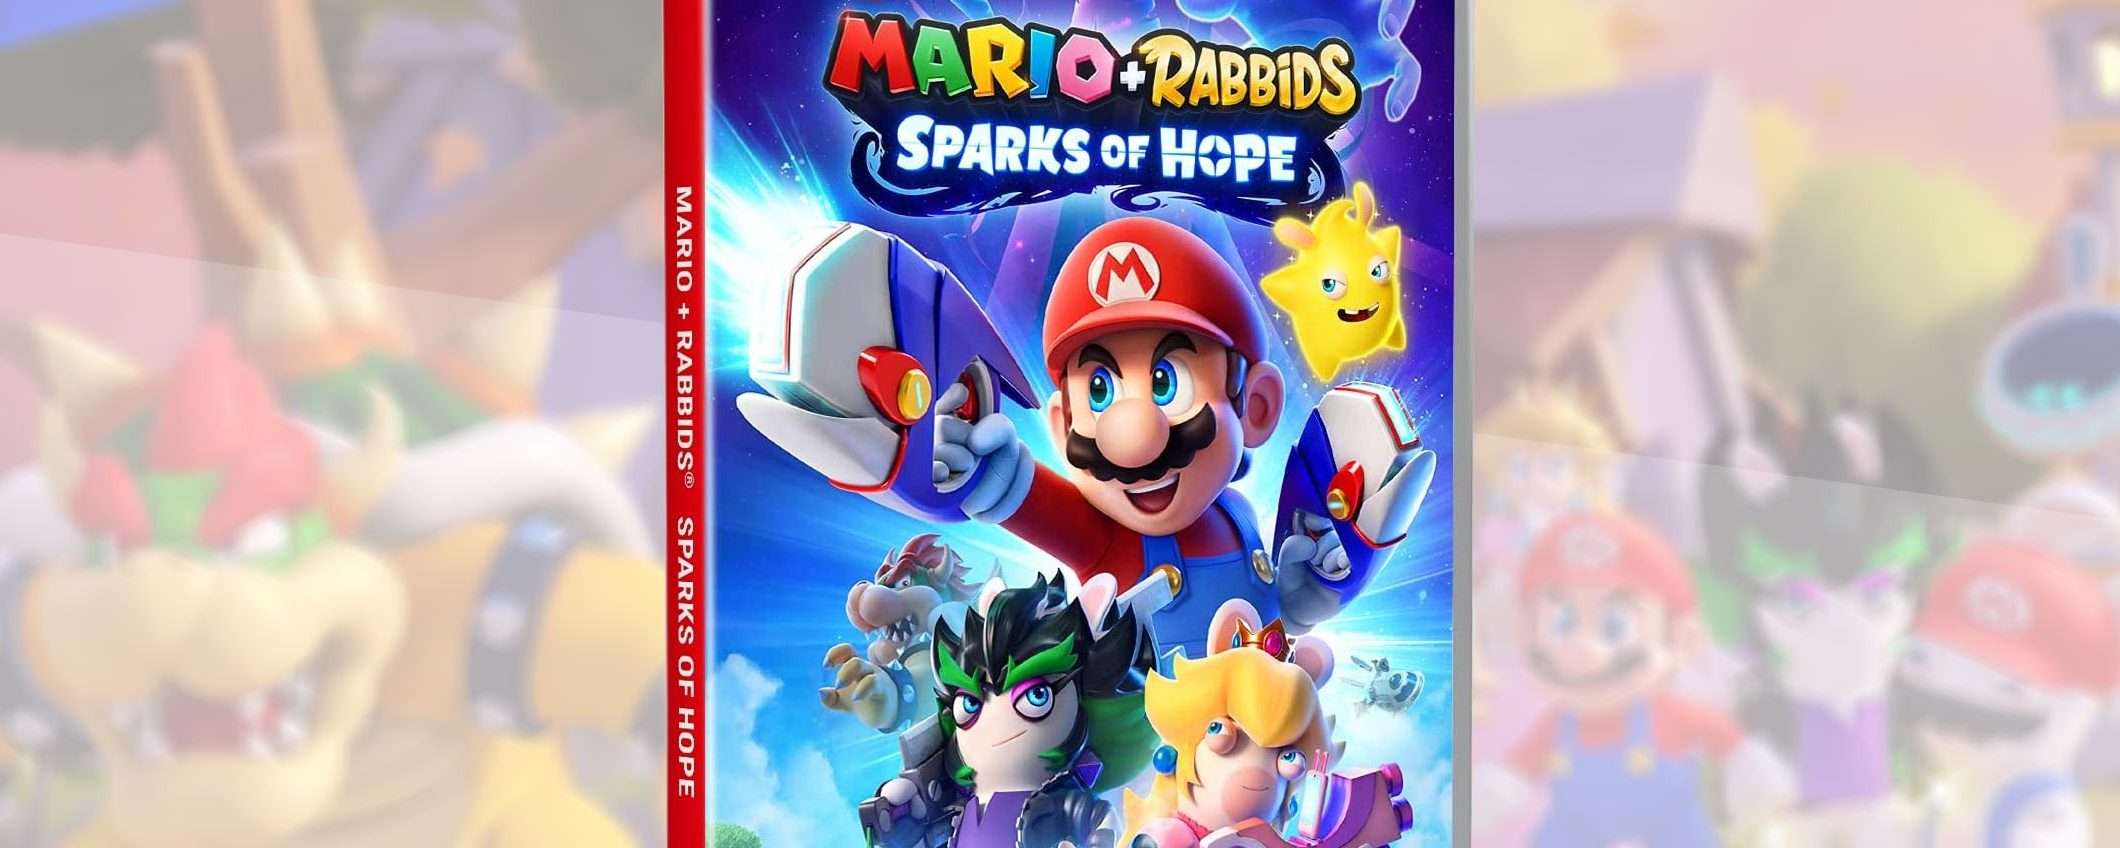 Mario+Rabbids Sparks of Hope per Switch: il coupon